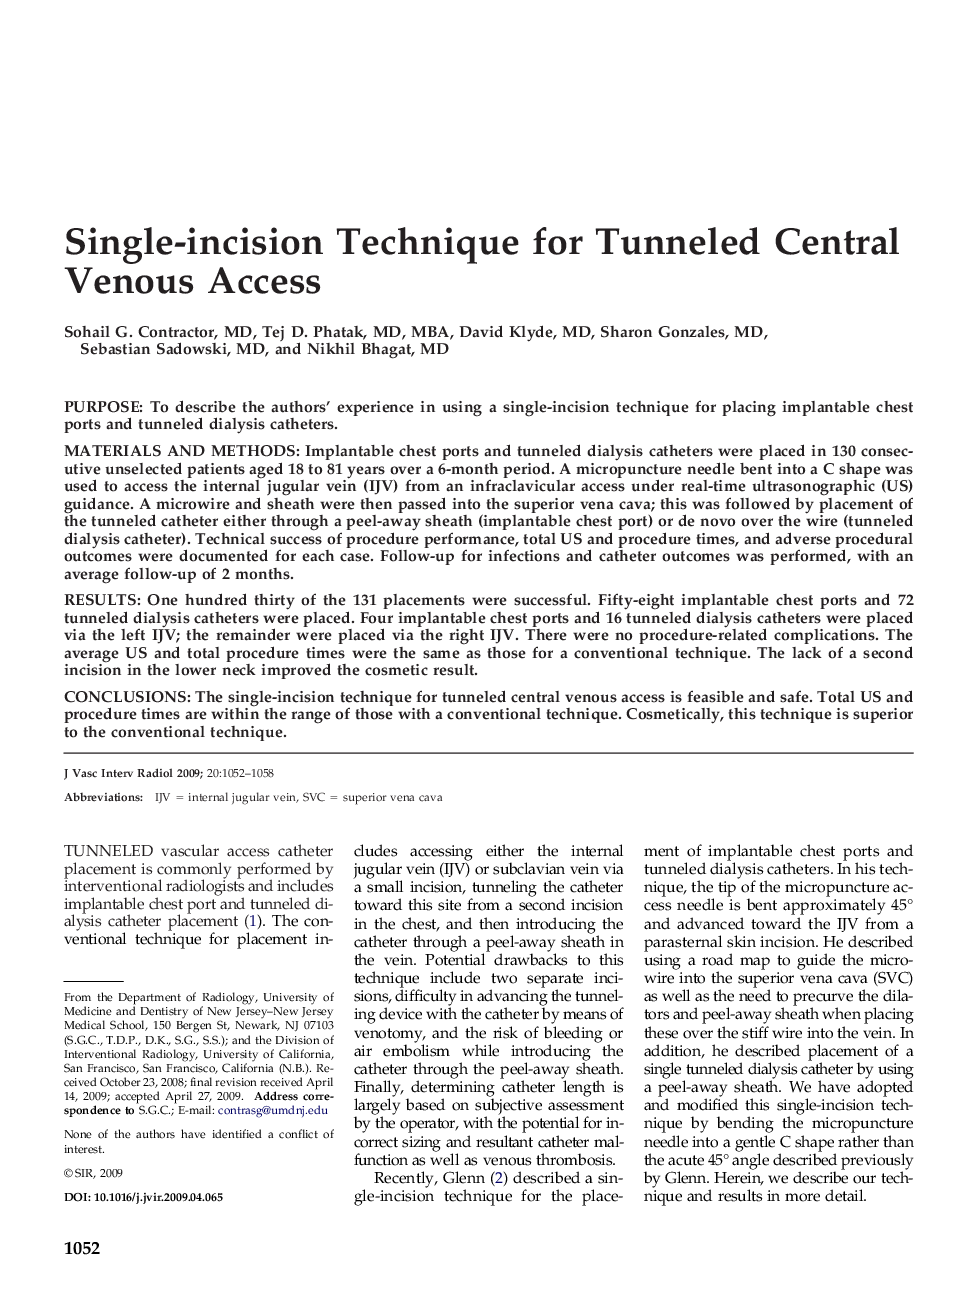 Single-incision Technique for Tunneled Central Venous Access